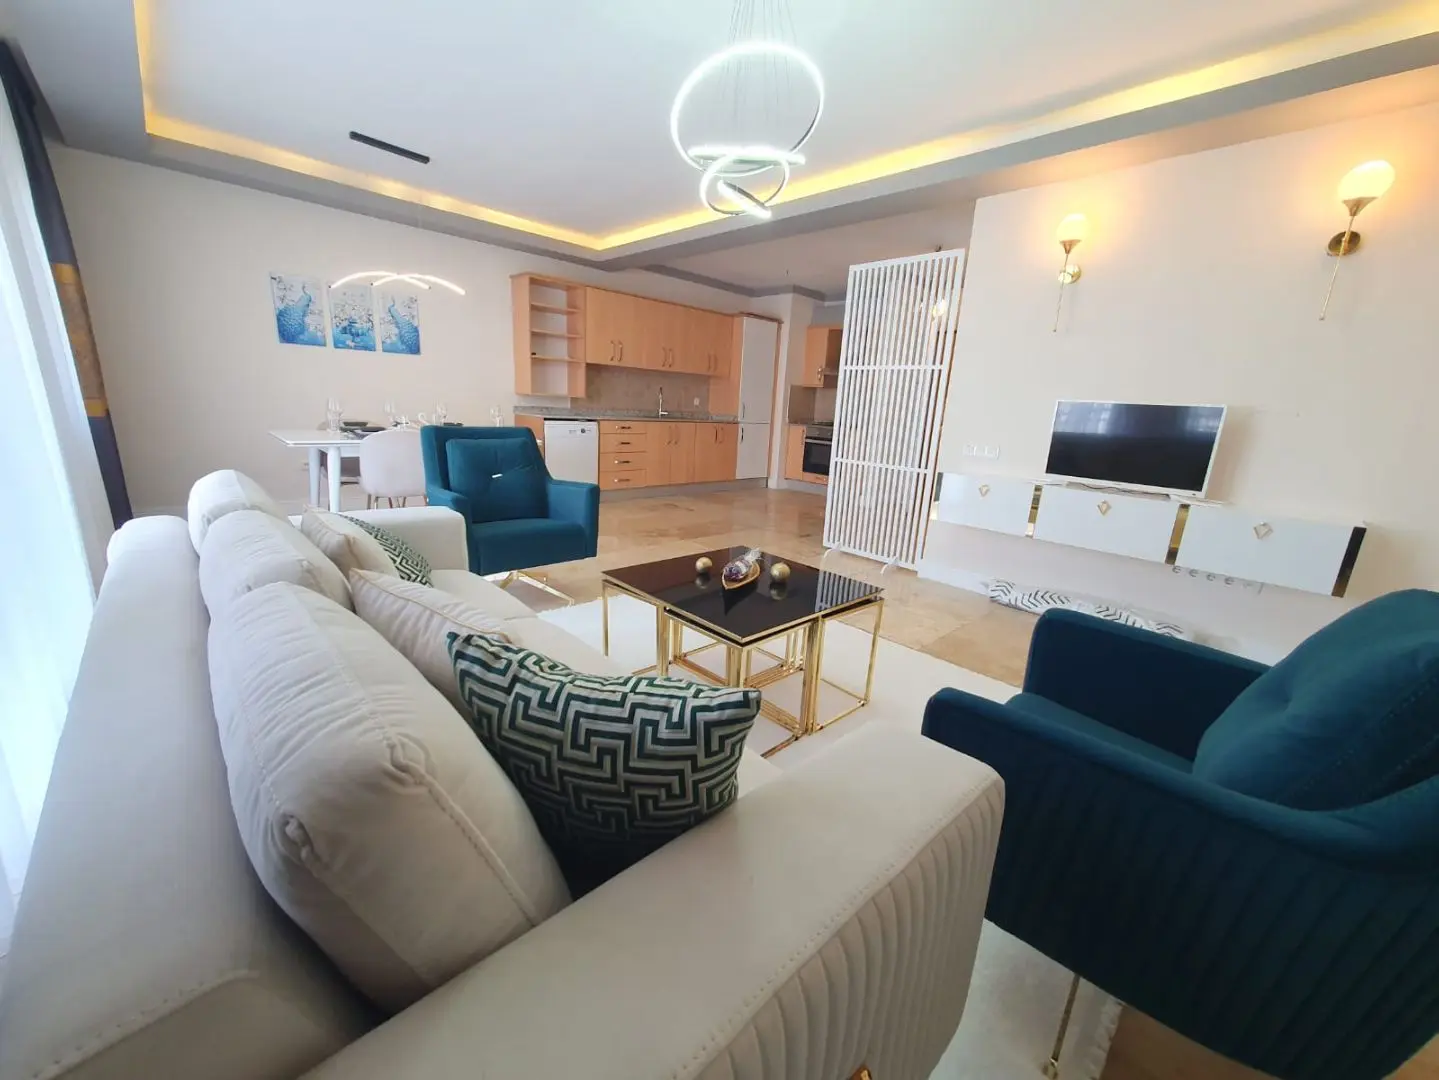 FULLY FURNISHED SPACIOUS 1+1 APARTMENT IN ALANYA CİKCİLLİ